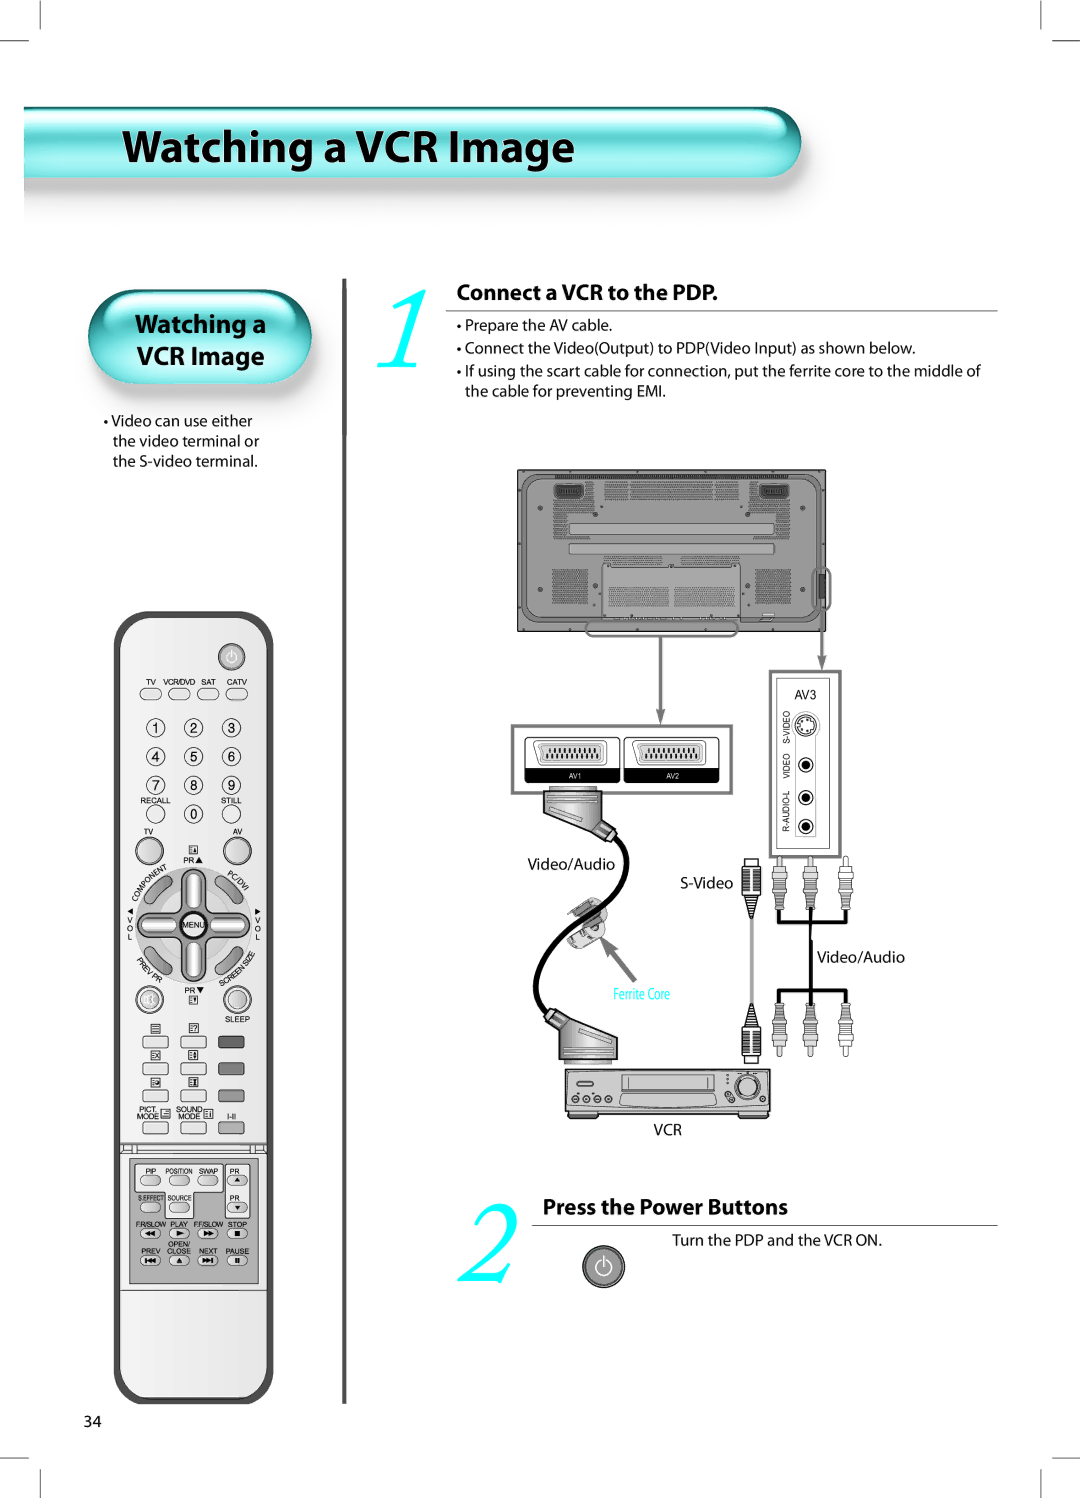 Daewoo DT-42A1 user manual Watching a VCR Image 